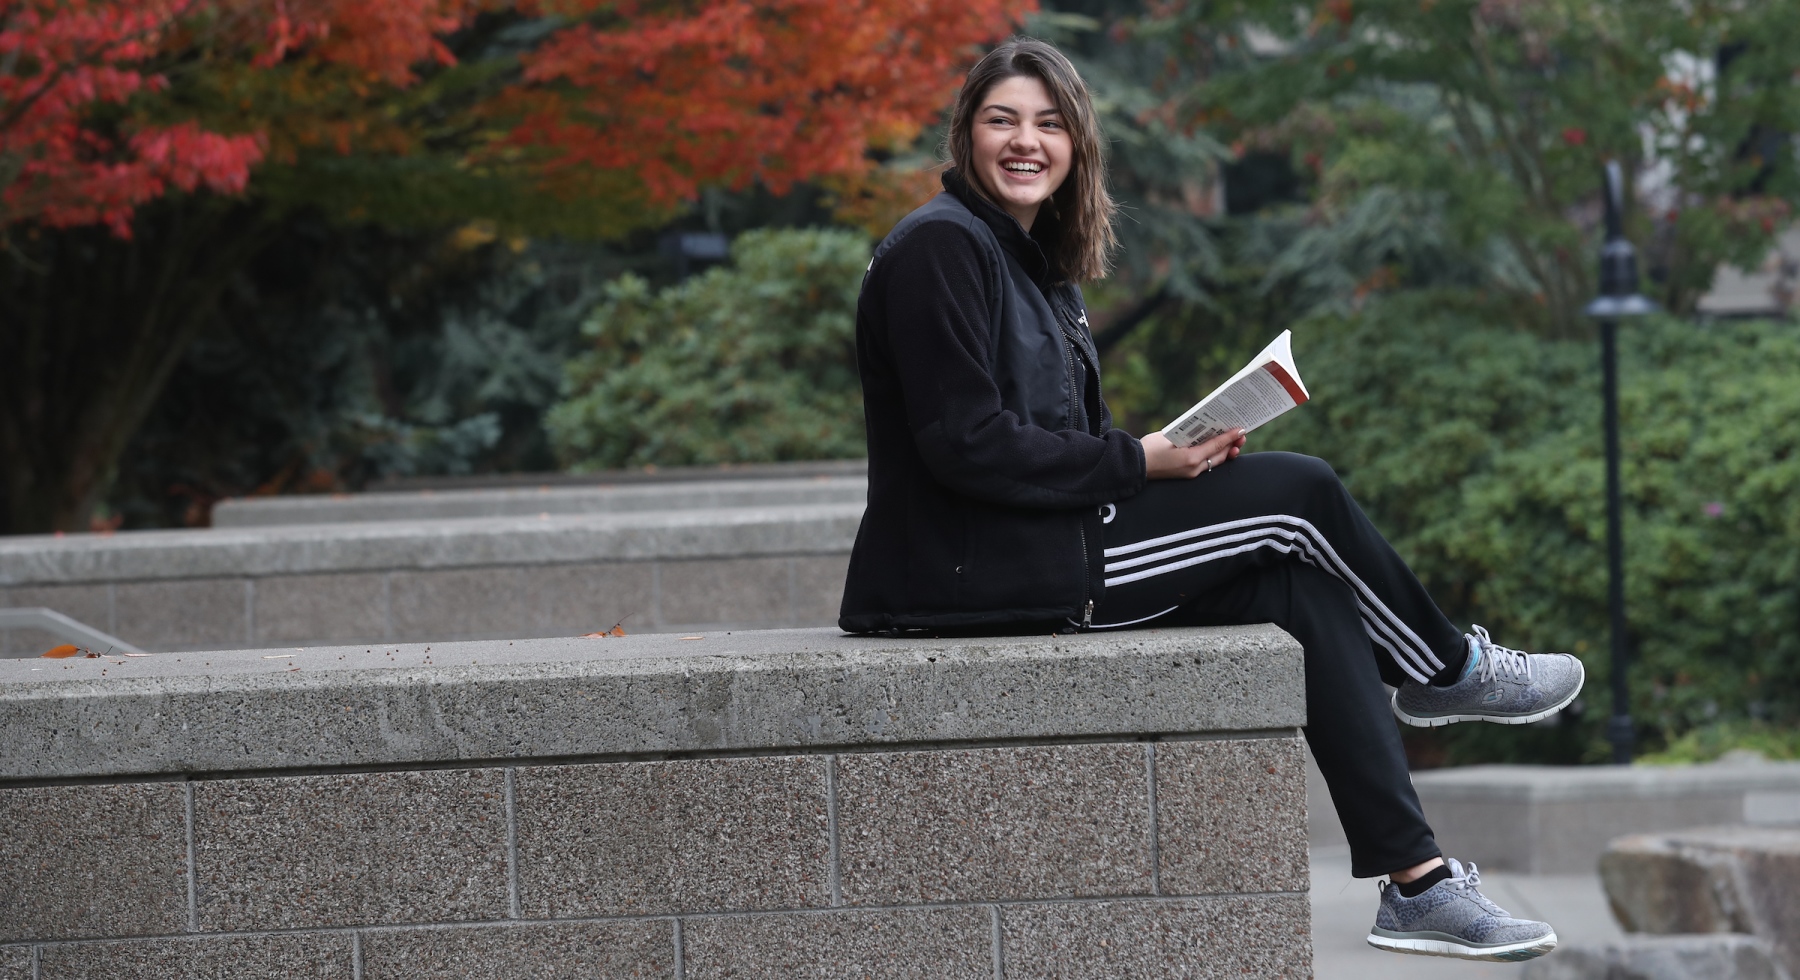 Learn More About Undergraduate Education at Albers